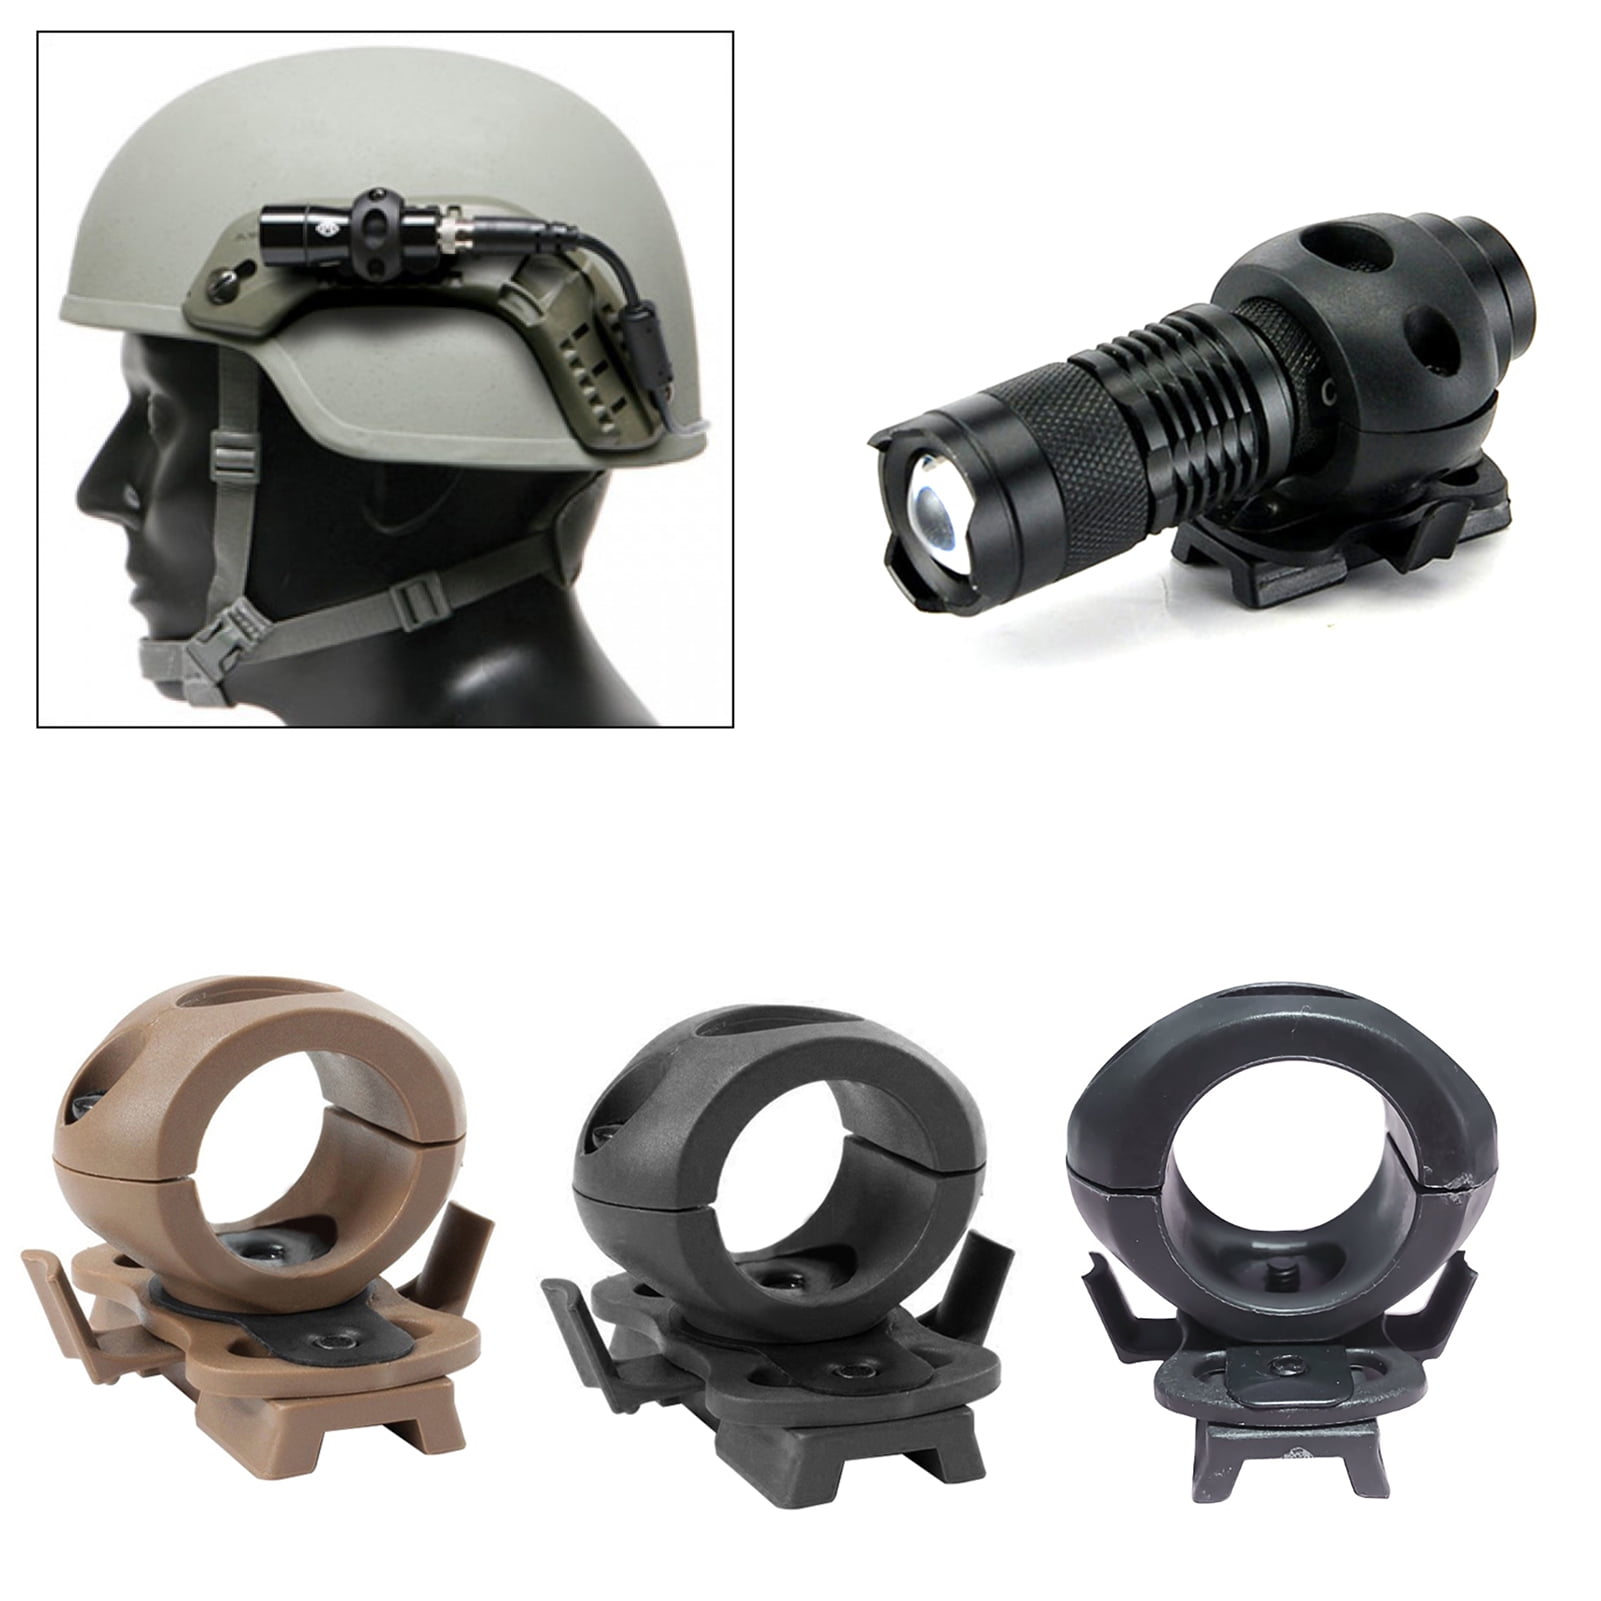 Black, DE, Green Tactical Airsoft Helmet Accessories 1 FAST Helmet Flashlight Holder Mount with Wrench Quick Release Flashlight Holder Clamp Clip Mount Accessory for FAST Helmet 3 Colors 